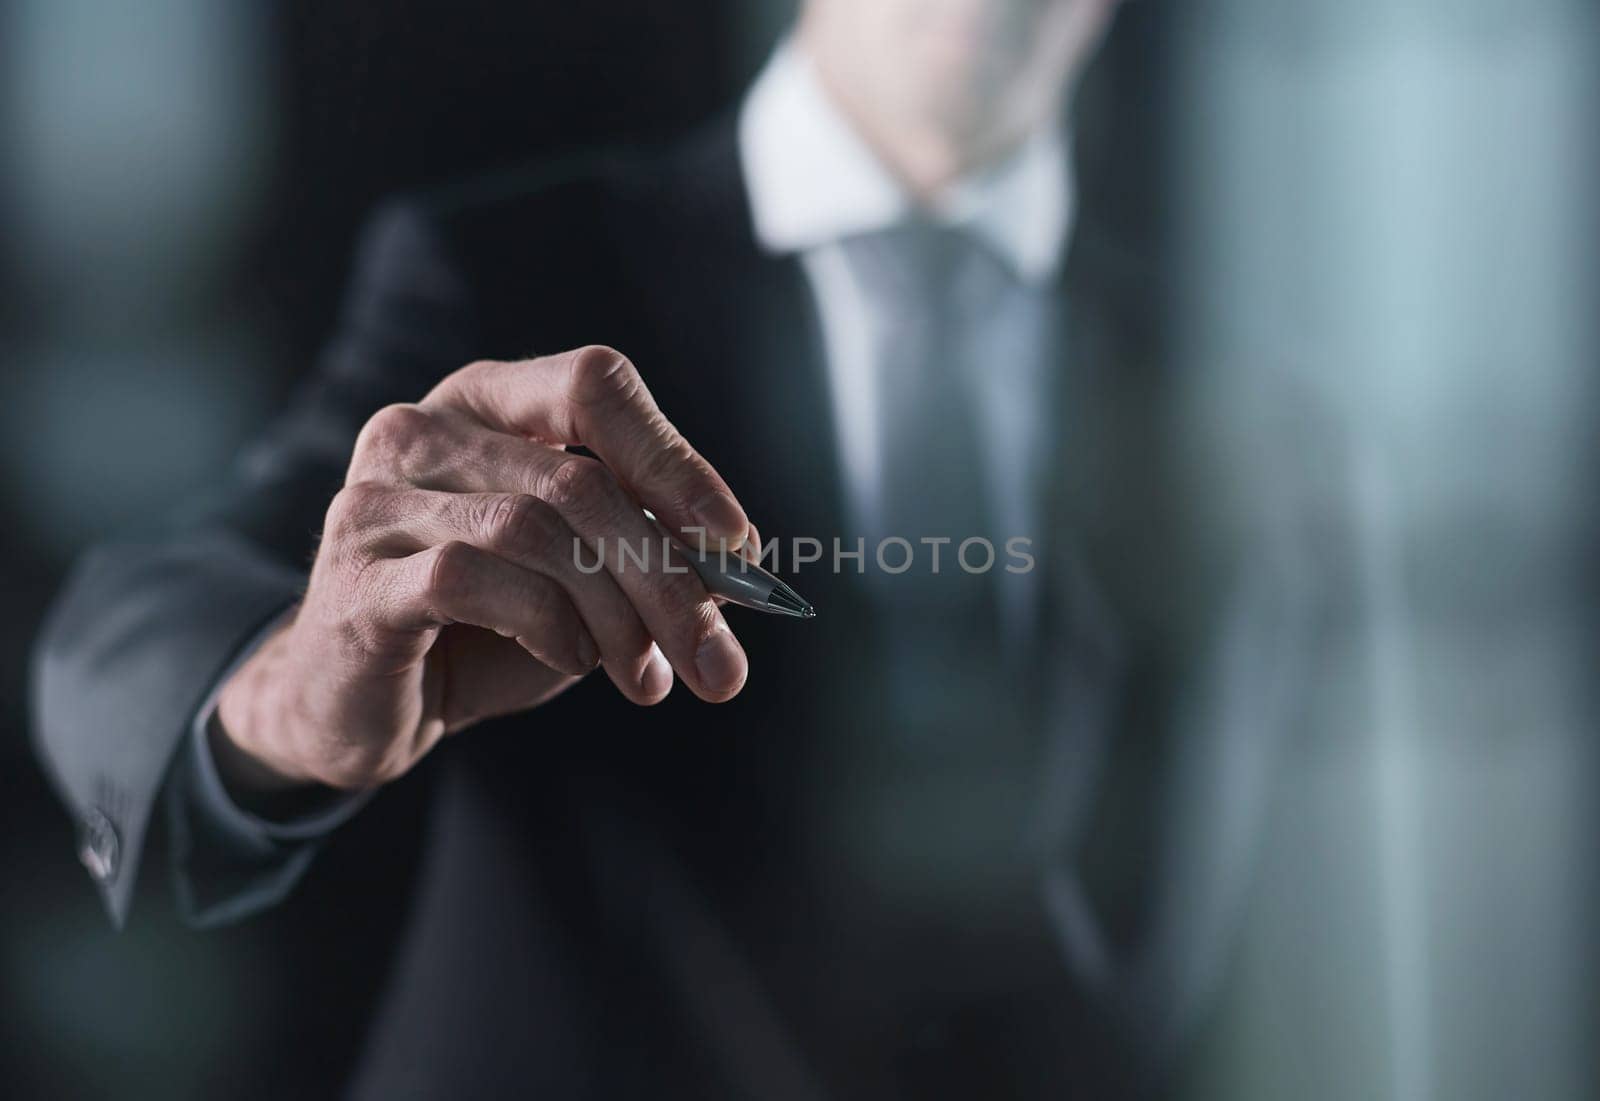 A hand holding a marker turned to the camera against a dark background